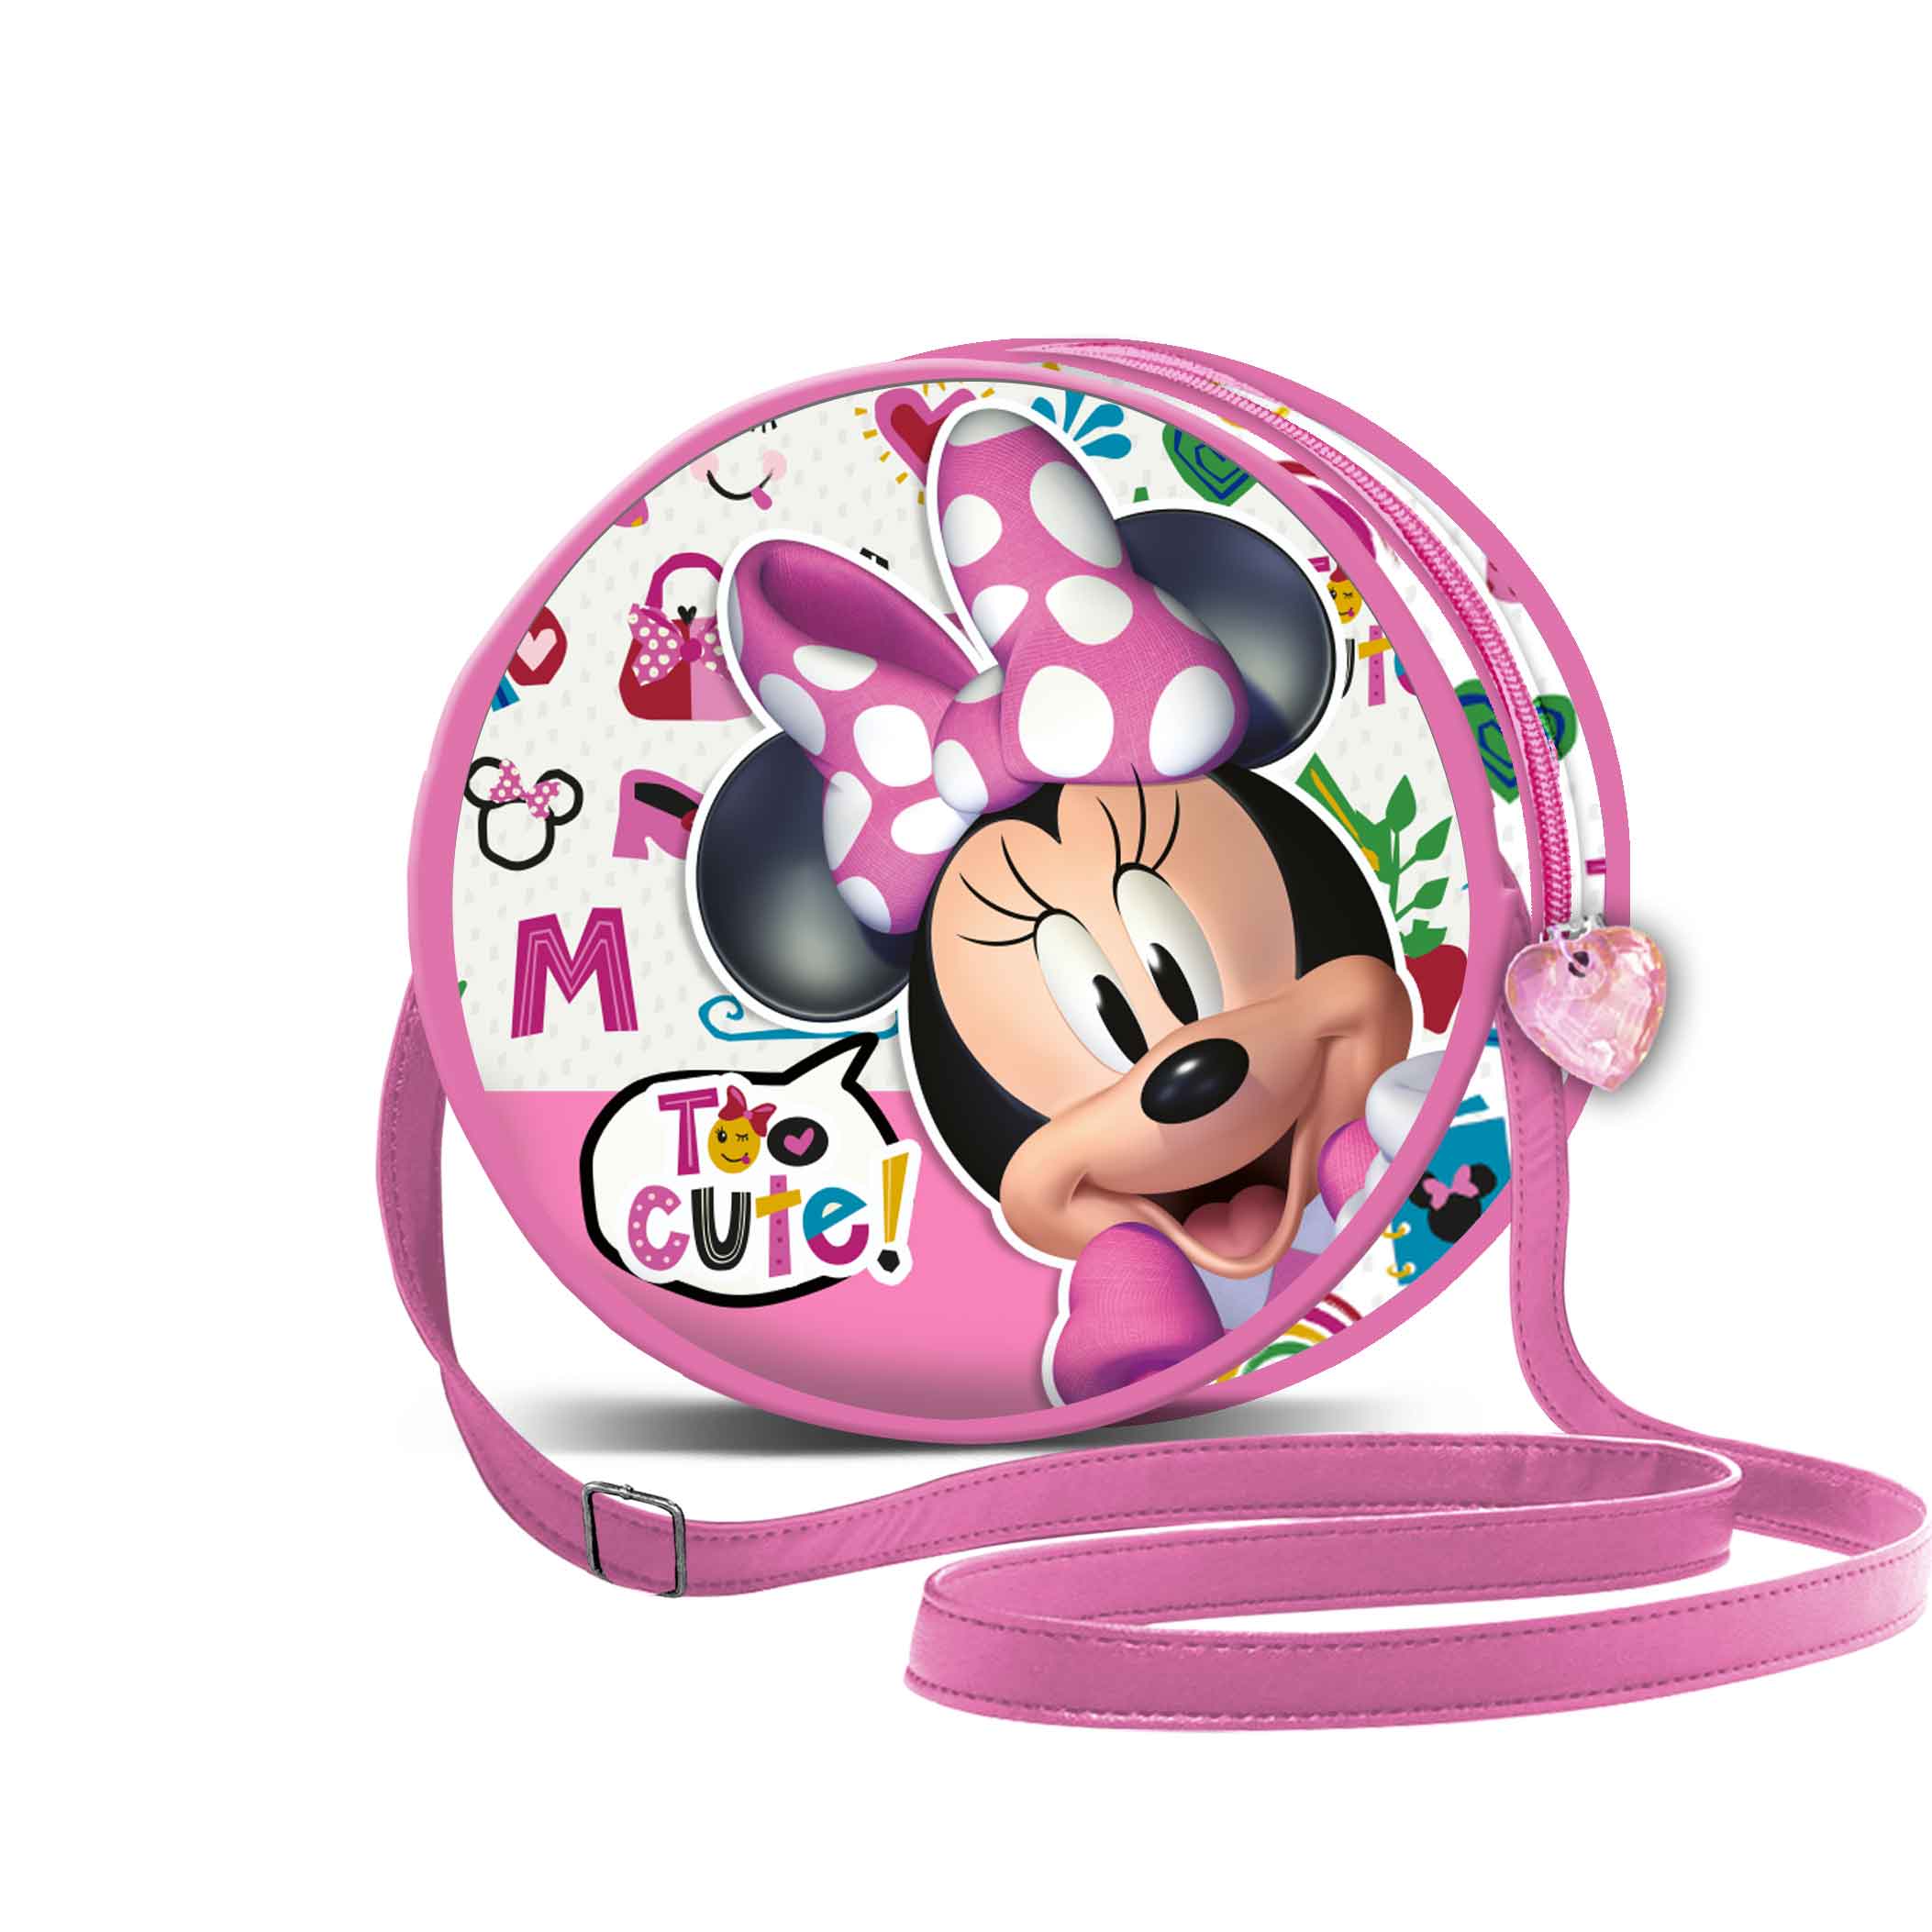 Round Shoulder Bag Minnie Mouse Too Cute